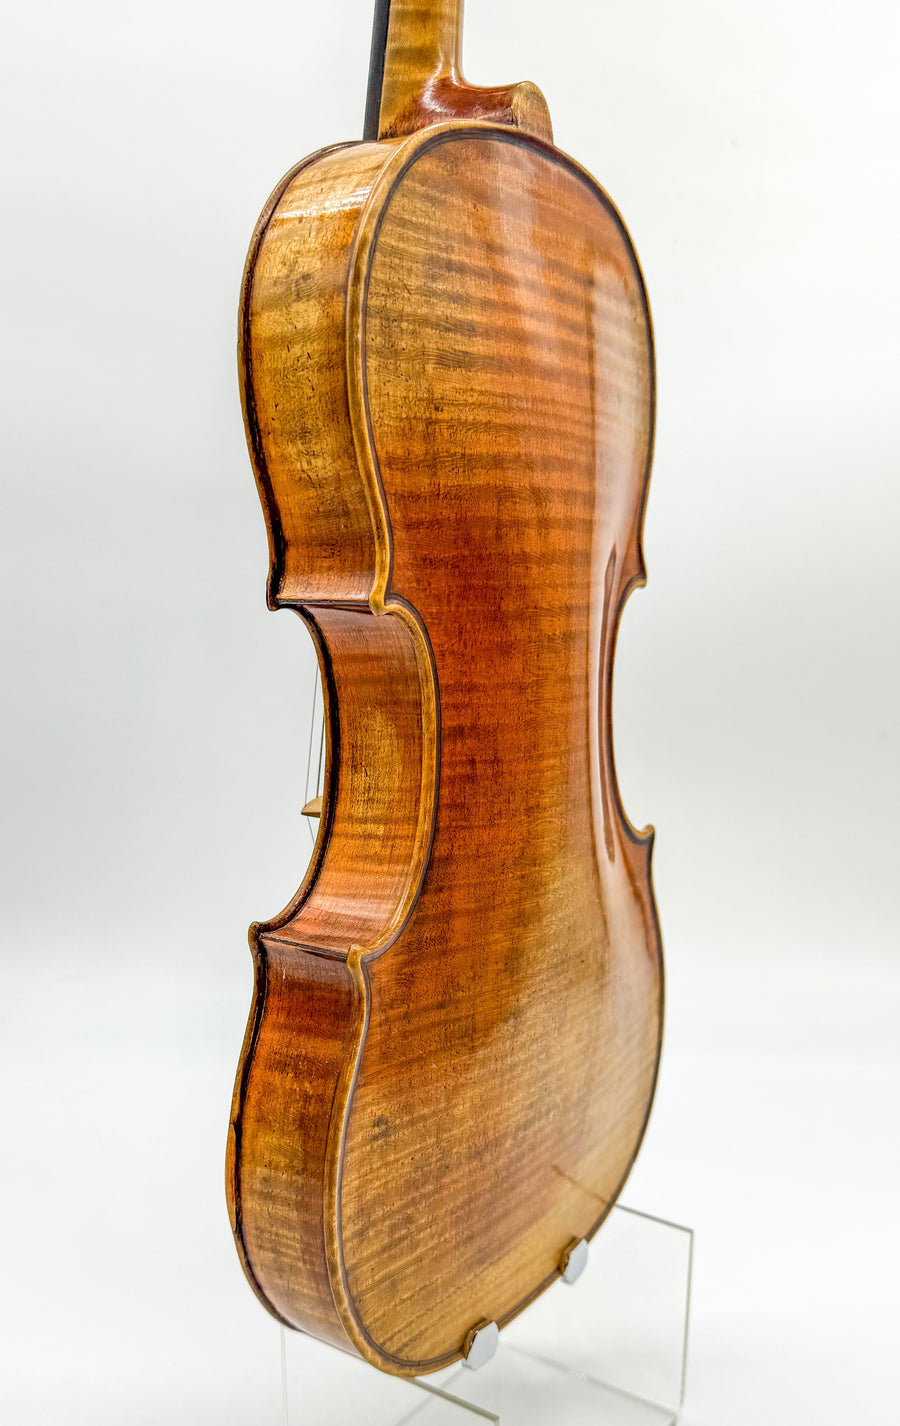 An Early 20th Century Violin by Hans Schirmer, Repaired By G. Dashner In 2001.